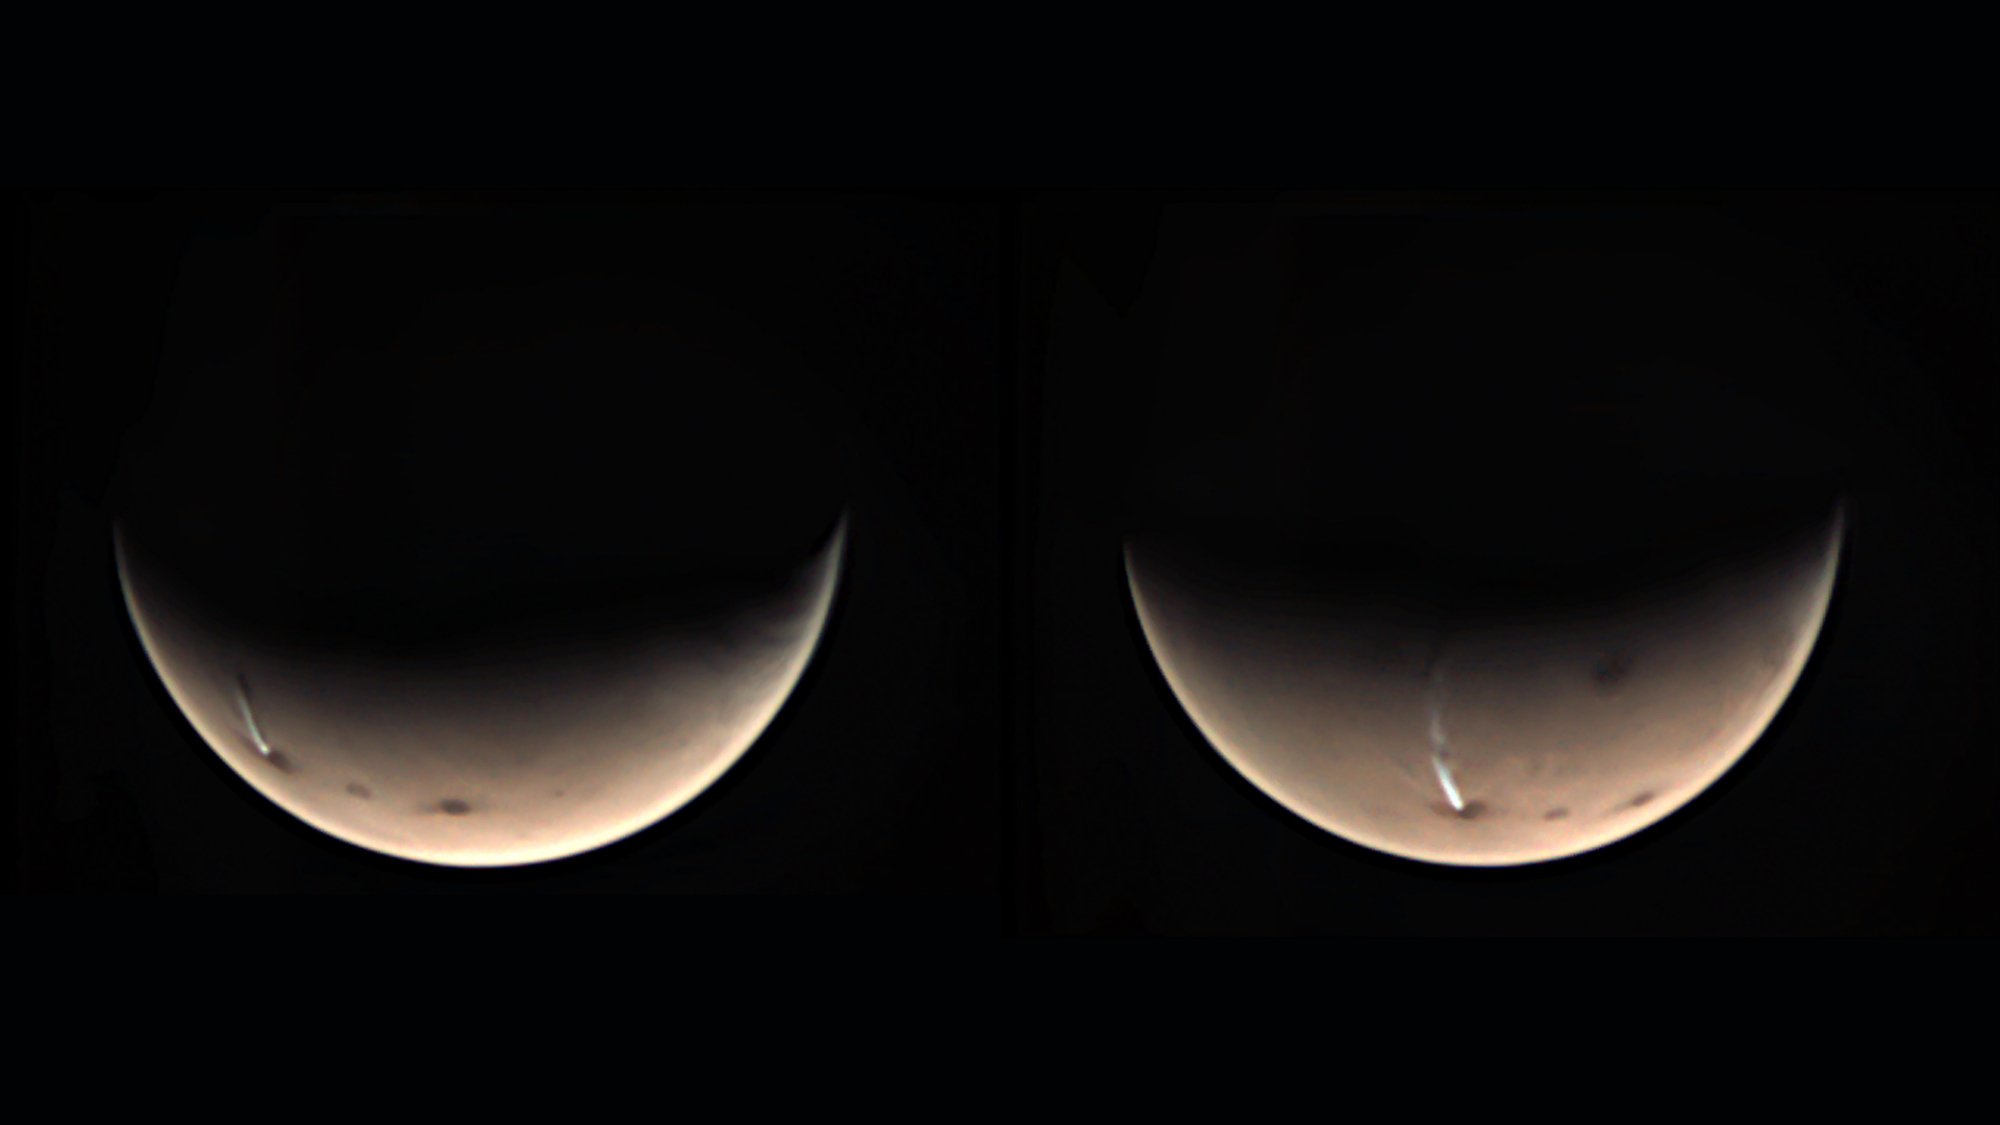 Arsia Mons cloud returning year after year